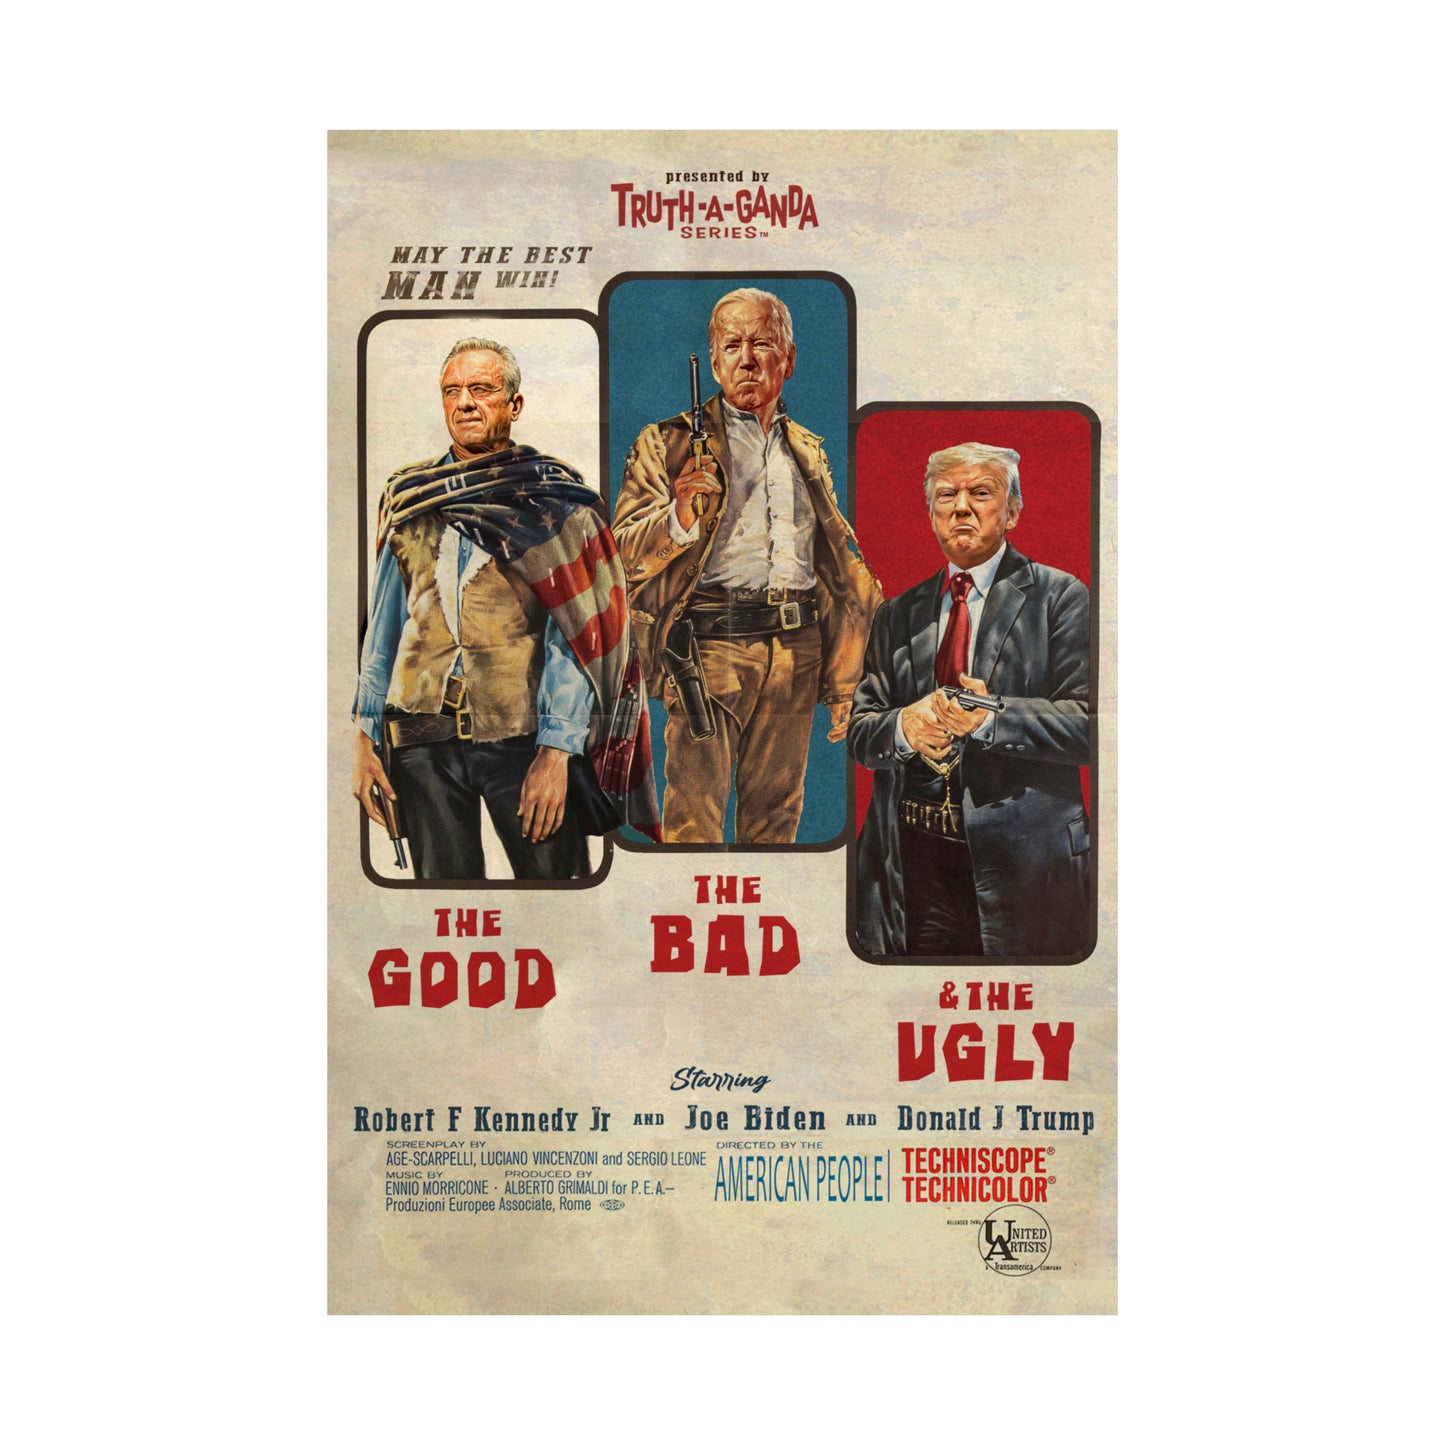 Truth-a-ganda Poster Series | The Good, the Bad, and the Ugly